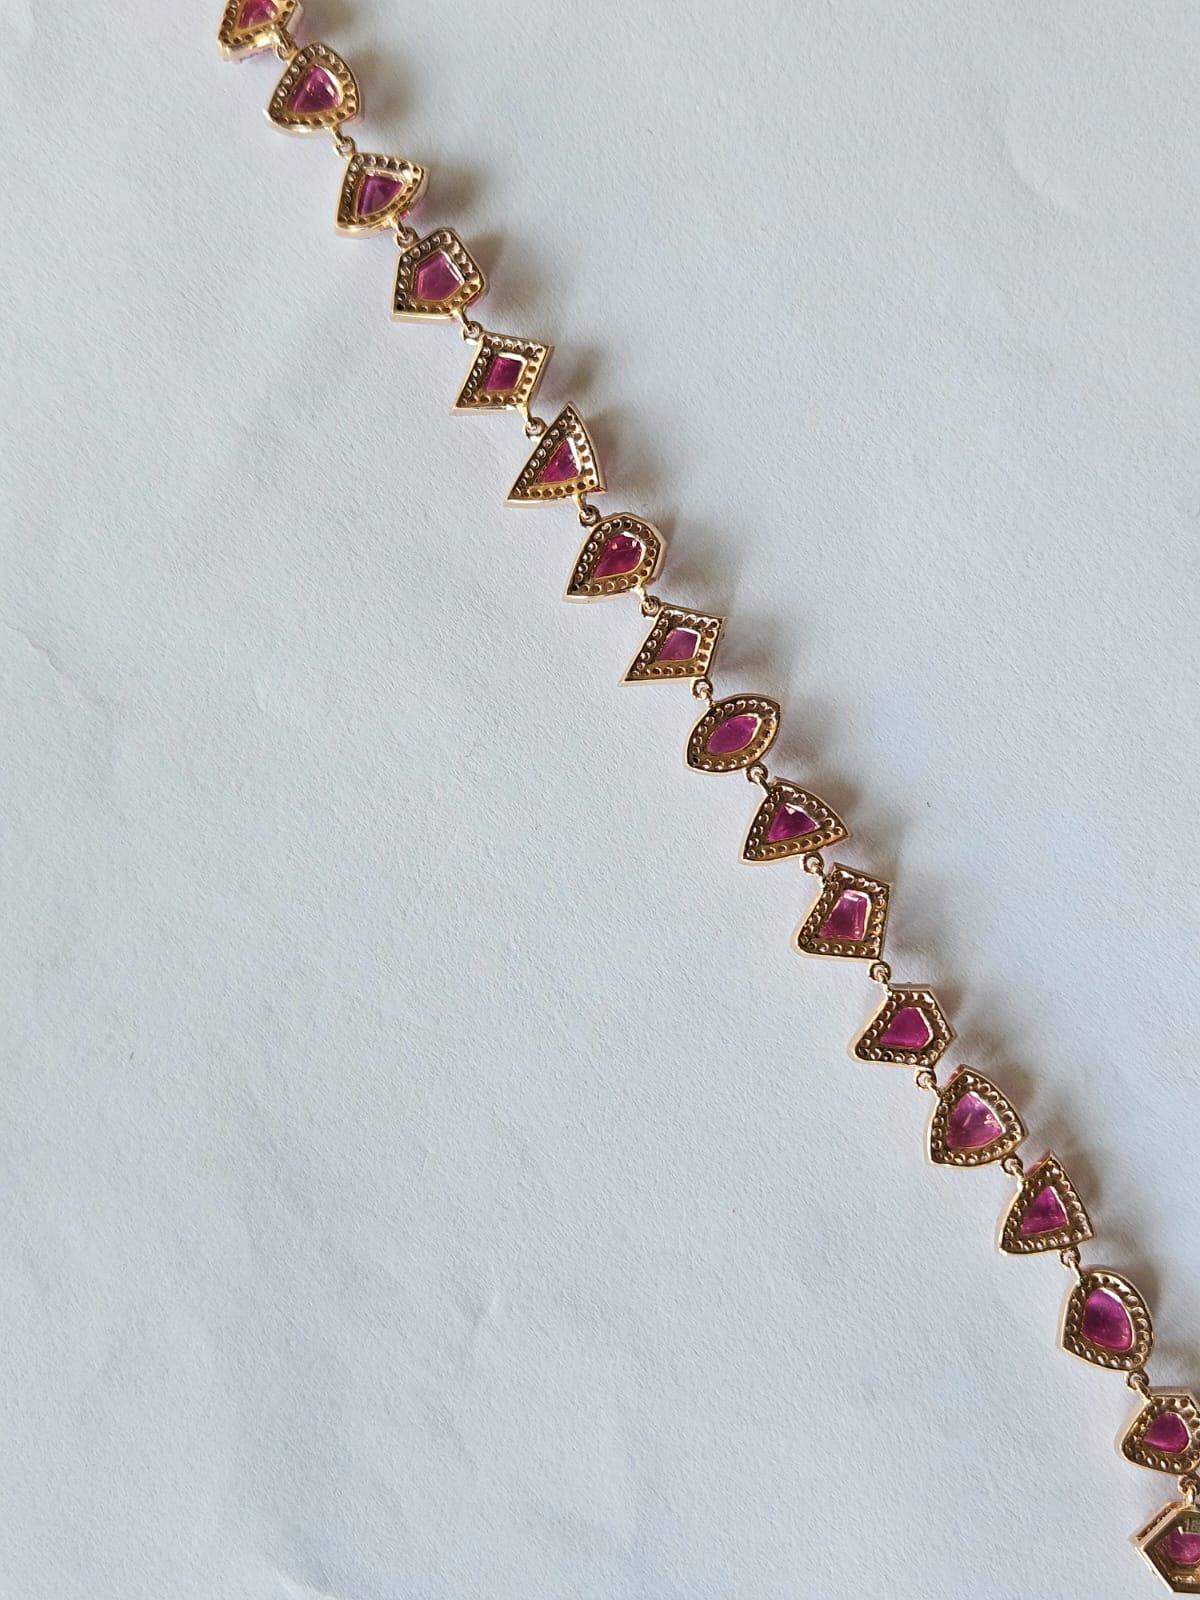 A very gorgeous and modern, one of a kind, Ruby Tennis Bracelet set in 18K Rose Gold & Diamonds. The weight of the uneven shaped Rubies is 11.38 carats. The Rubies are completely natural, without any treatment. The Diamonds weight is 1.67 carats.